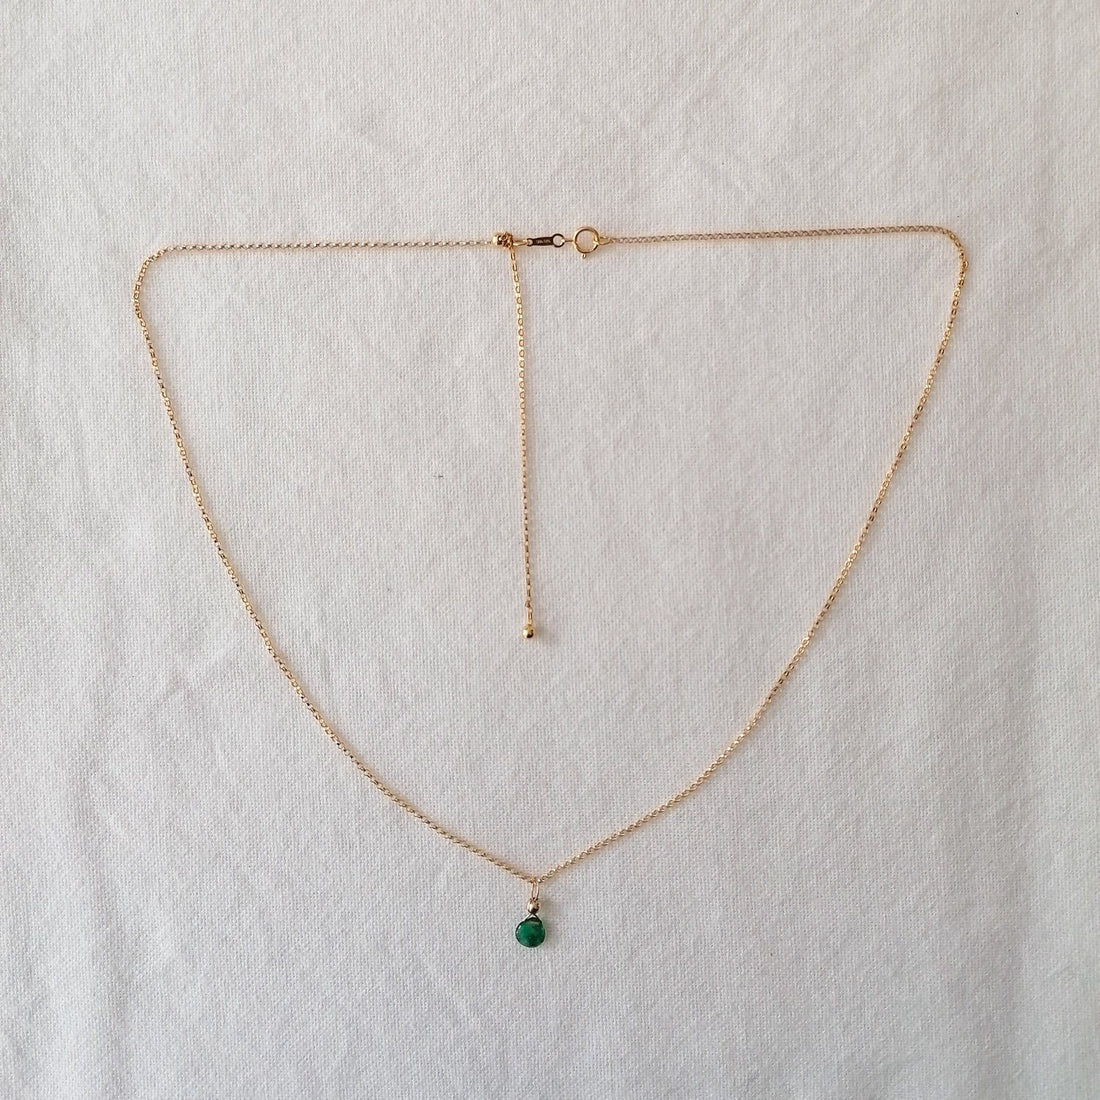 Emerald Isla Pendant in Gold Necklaces Sayulita Sol 14kt Gold Fill Adjustable Chain +$85 